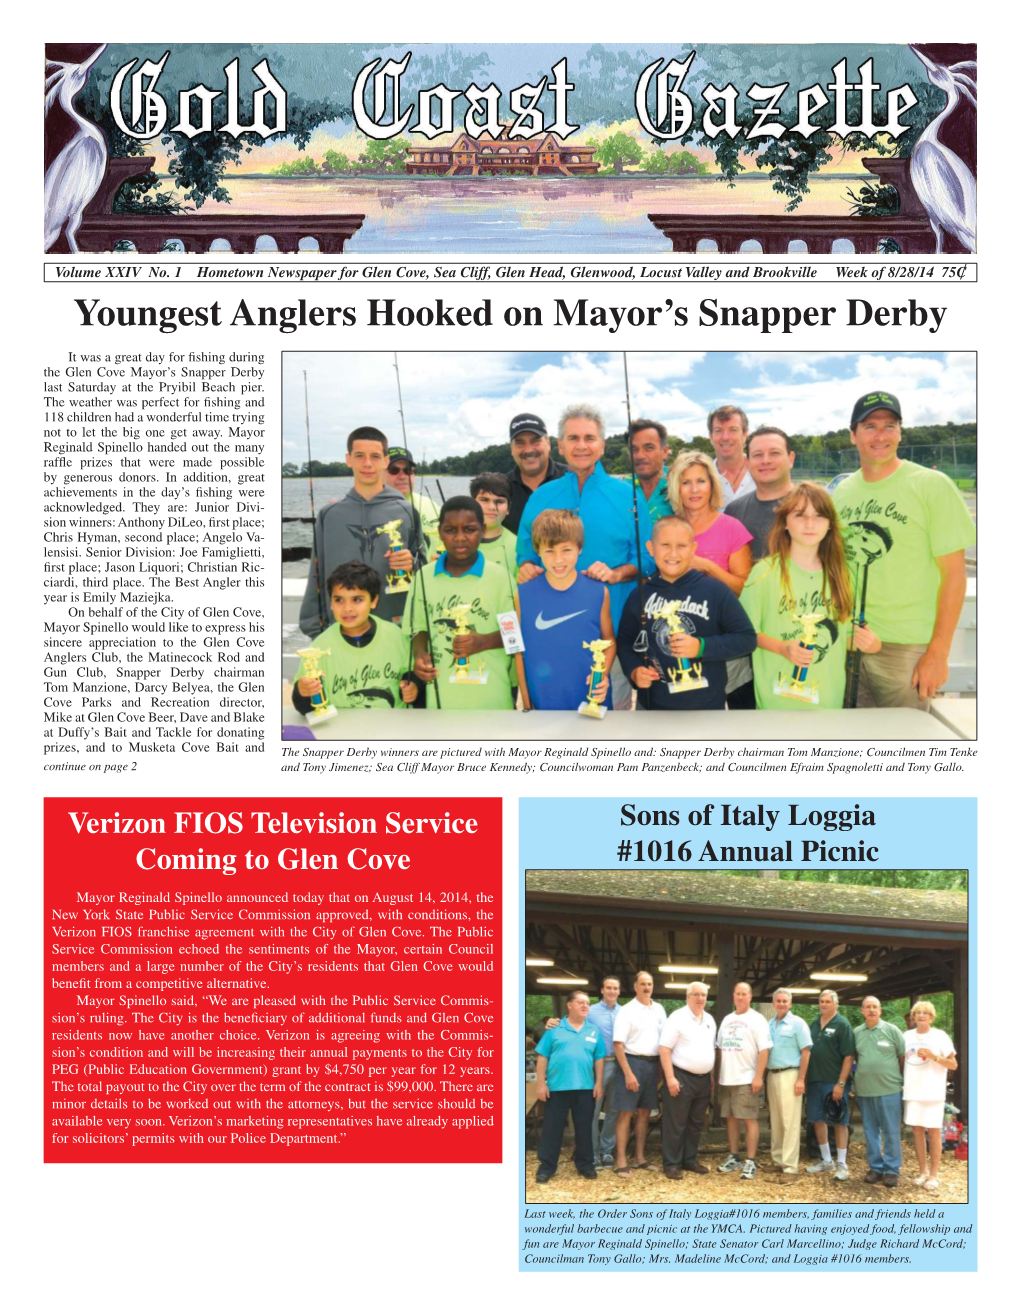 Youngest Anglers Hooked on Mayor's Snapper Derby